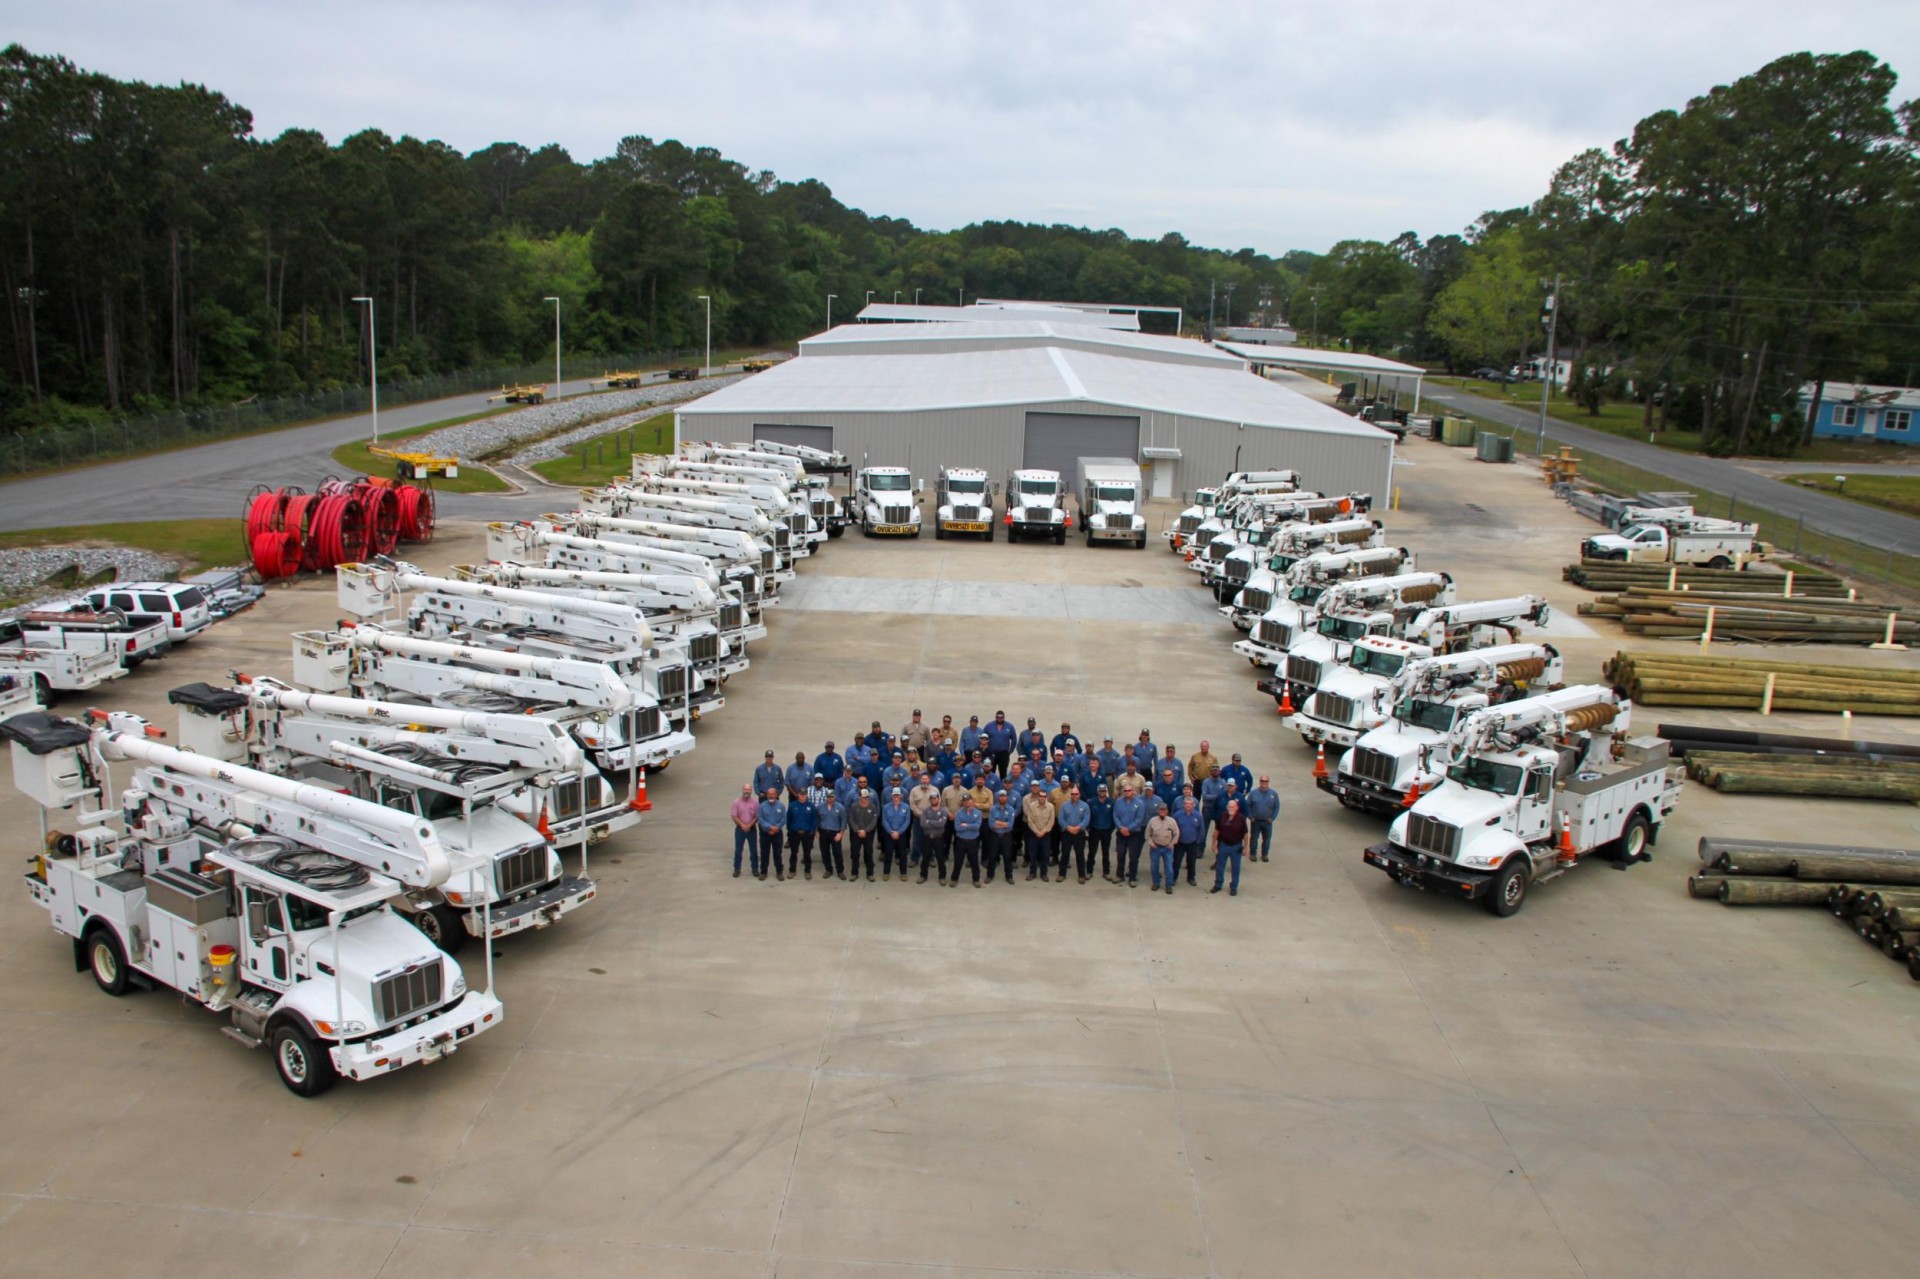 The employees of Colquitt EMC play a vital role in providing competitive and reliable electric power to South Georgia.